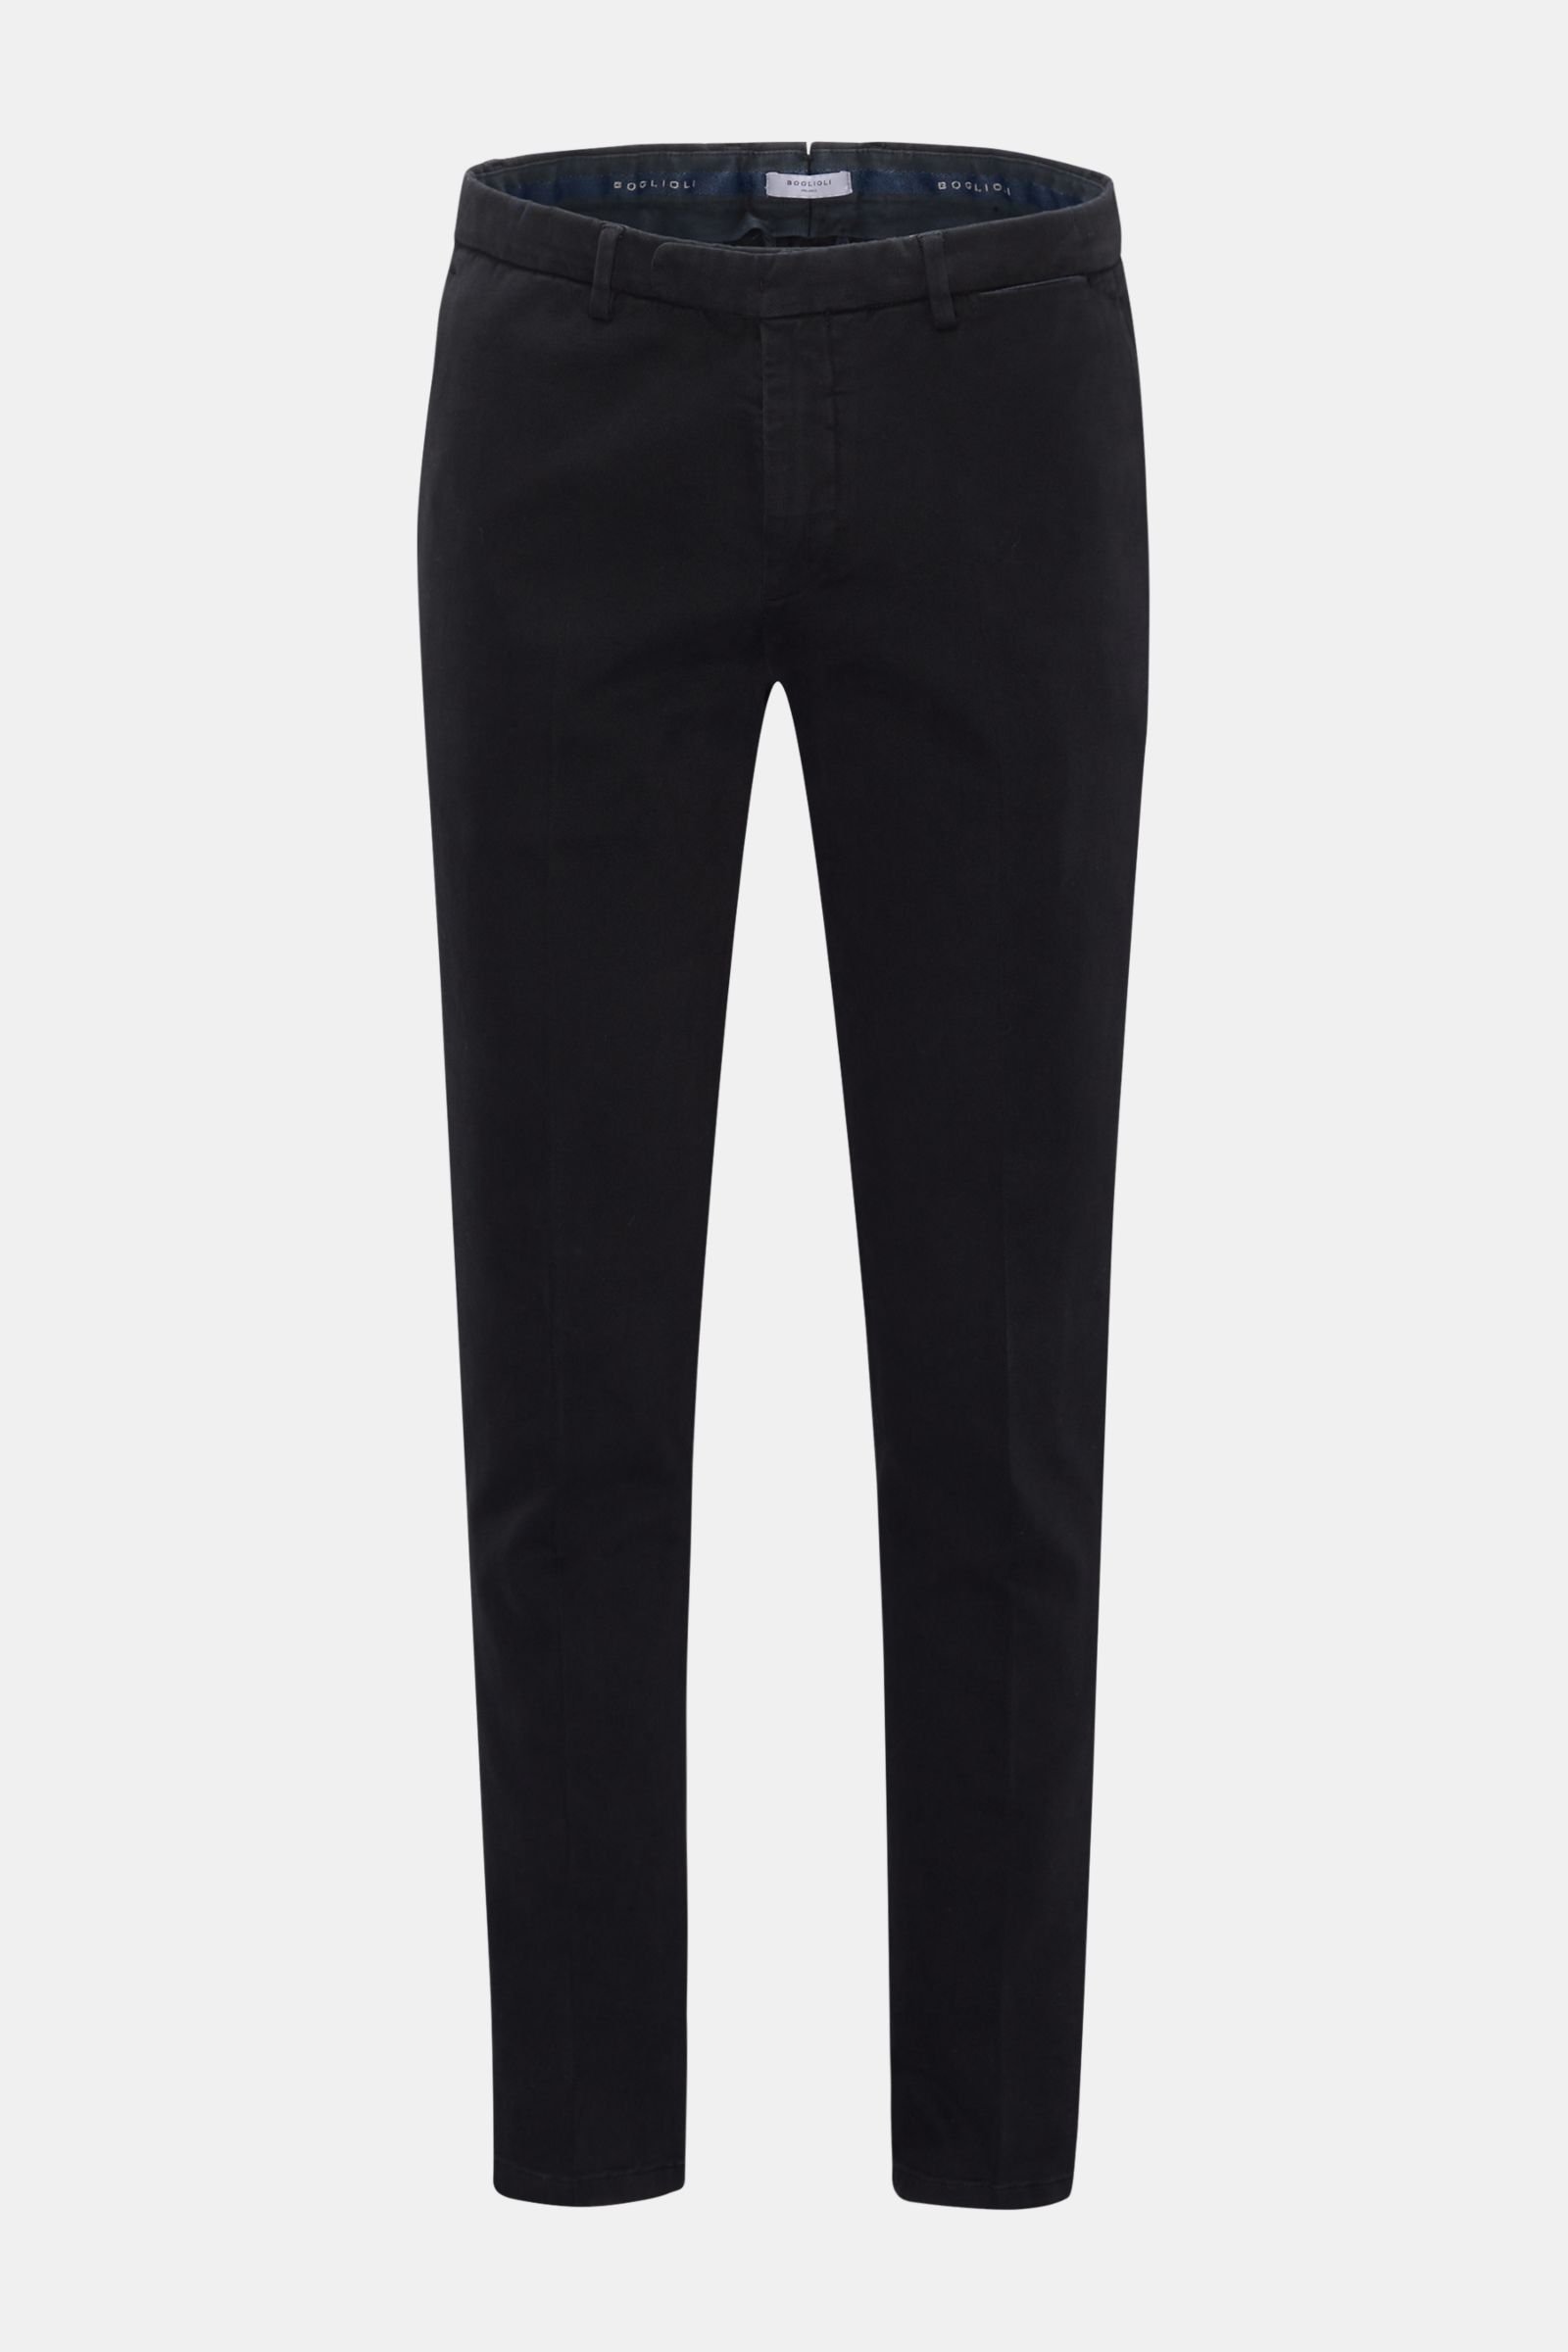 Cotton trousers anthracite